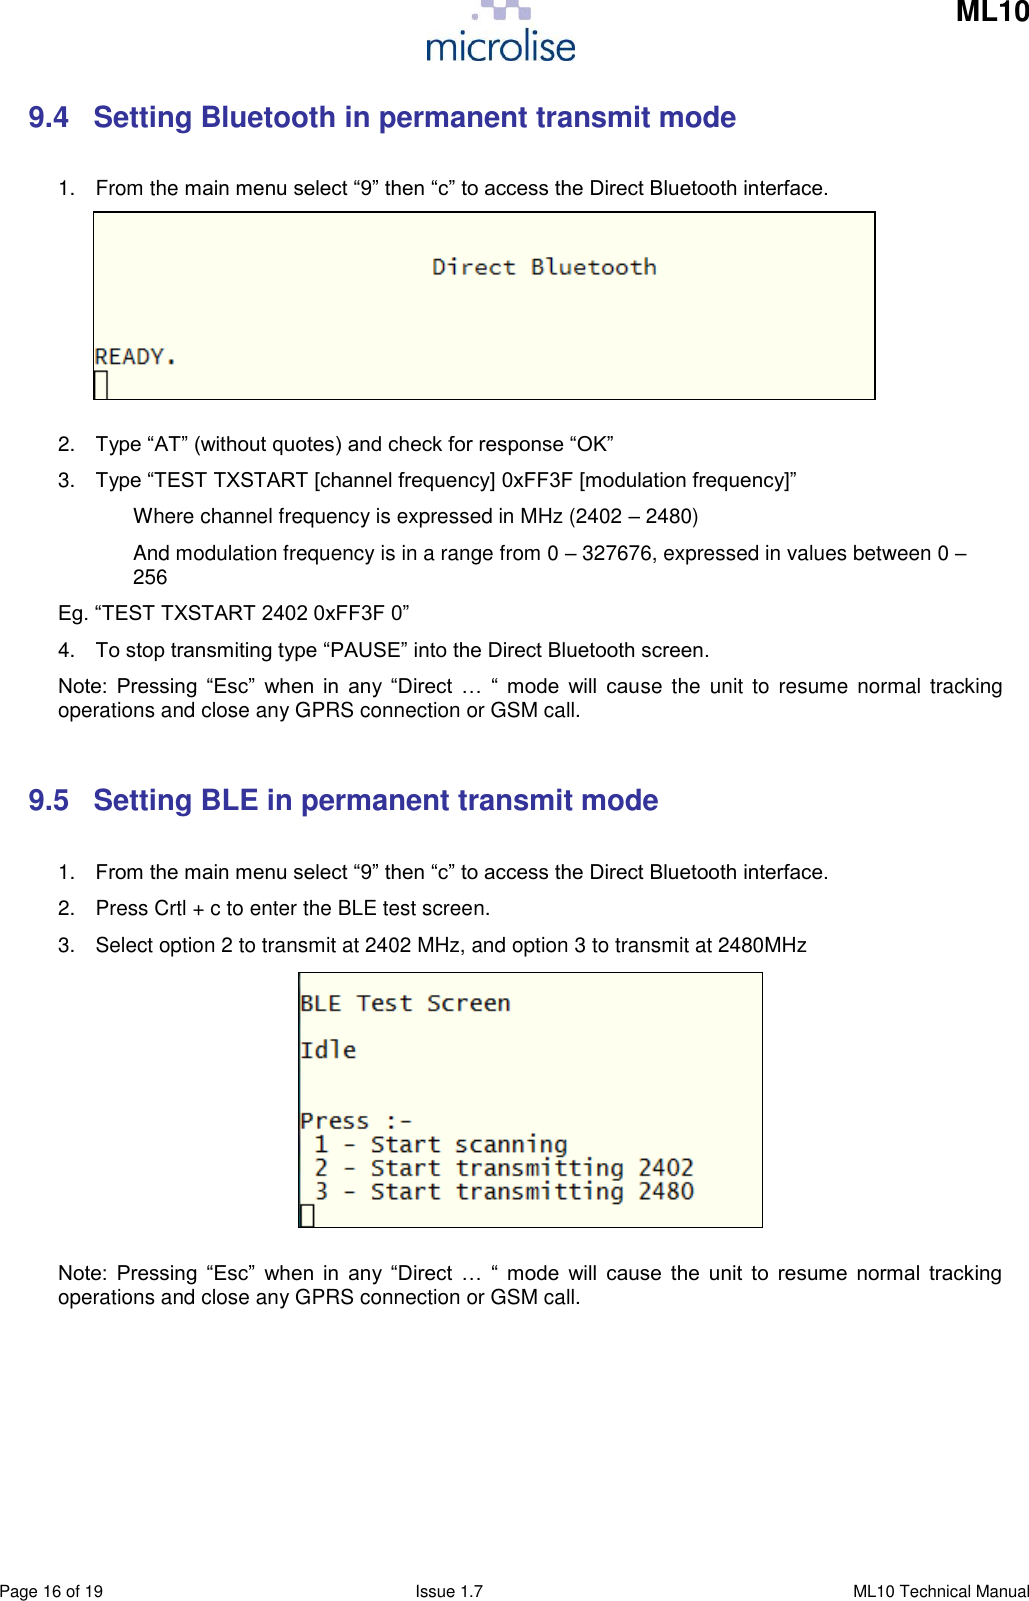     ML10    Page 16 of 19  Issue 1.7  ML10 Technical Manual 9.4  Setting Bluetooth in permanent transmit mode  1.  From the main menu select “9” then “c” to access the Direct Bluetooth interface.       2. Type “AT” (without quotes) and check for response “OK” 3. Type “TEST TXSTART [channel frequency] 0xFF3F [modulation frequency]” Where channel frequency is expressed in MHz (2402 – 2480) And modulation frequency is in a range from 0 – 327676, expressed in values between 0 – 256 Eg. “TEST TXSTART 2402 0xFF3F 0” 4. To stop transmiting type “PAUSE” into the Direct Bluetooth screen. Note:  Pressing  “Esc”  when  in  any  “Direct  …  “  mode  will  cause  the unit  to  resume  normal tracking operations and close any GPRS connection or GSM call.  9.5  Setting BLE in permanent transmit mode  1. From the main menu select “9” then “c” to access the Direct Bluetooth interface. 2.  Press Crtl + c to enter the BLE test screen.  3.  Select option 2 to transmit at 2402 MHz, and option 3 to transmit at 2480MHz         Note:  Pressing  “Esc”  when  in  any  “Direct  …  “  mode  will  cause  the  unit  to  resume  normal  tracking operations and close any GPRS connection or GSM call.       